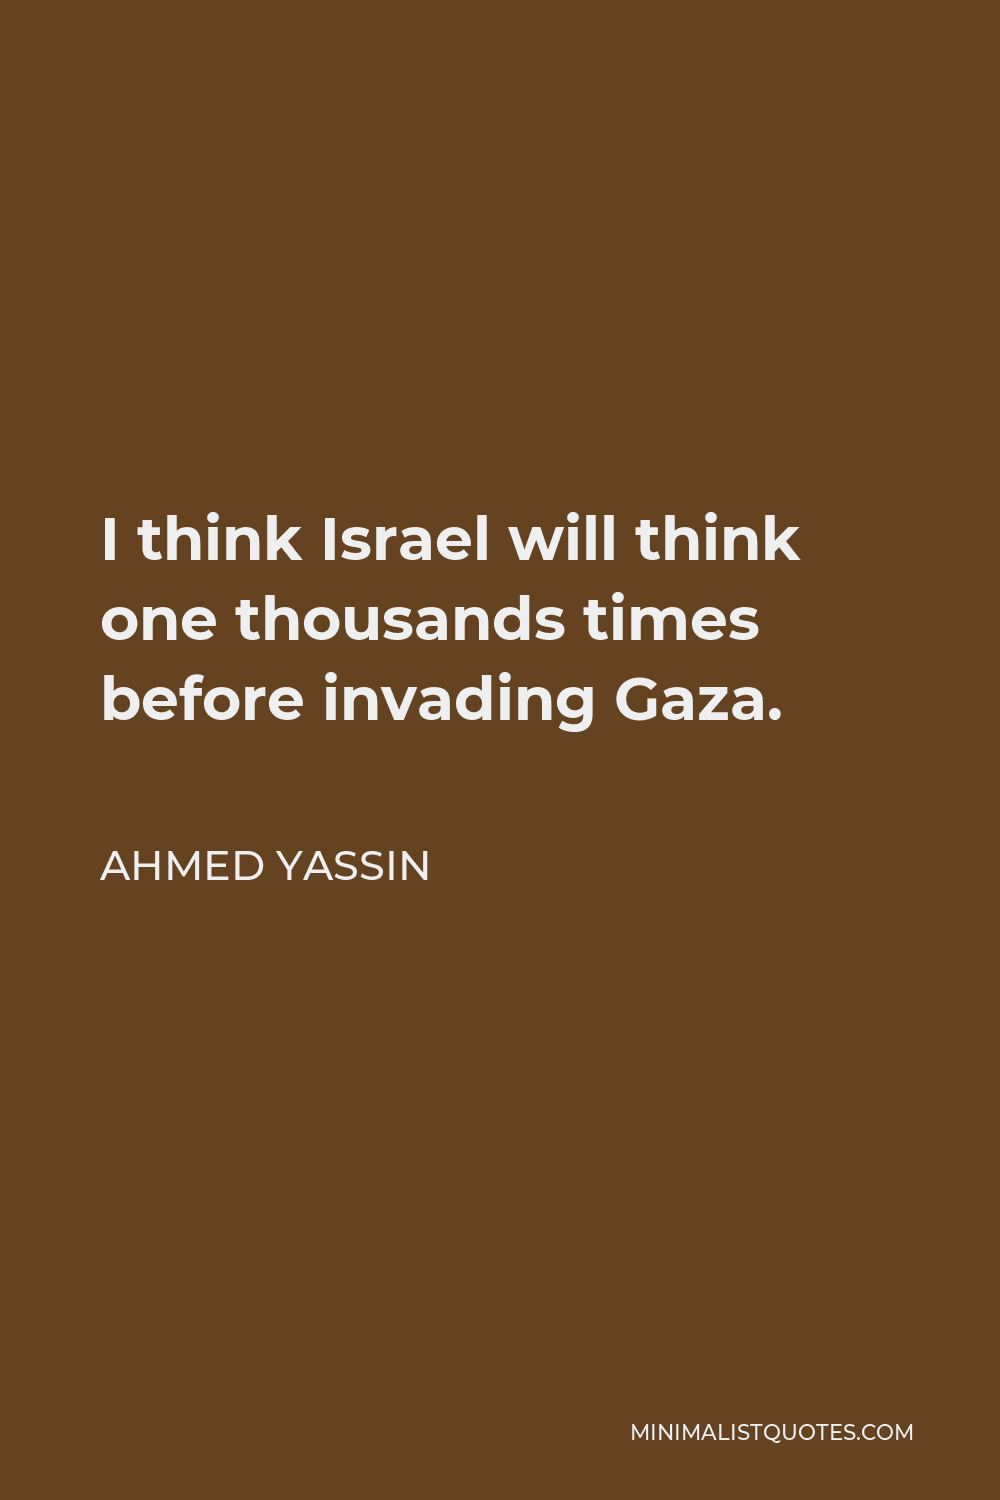 Ahmed Yassin Quote - I think Israel will think one thousands times before invading Gaza.